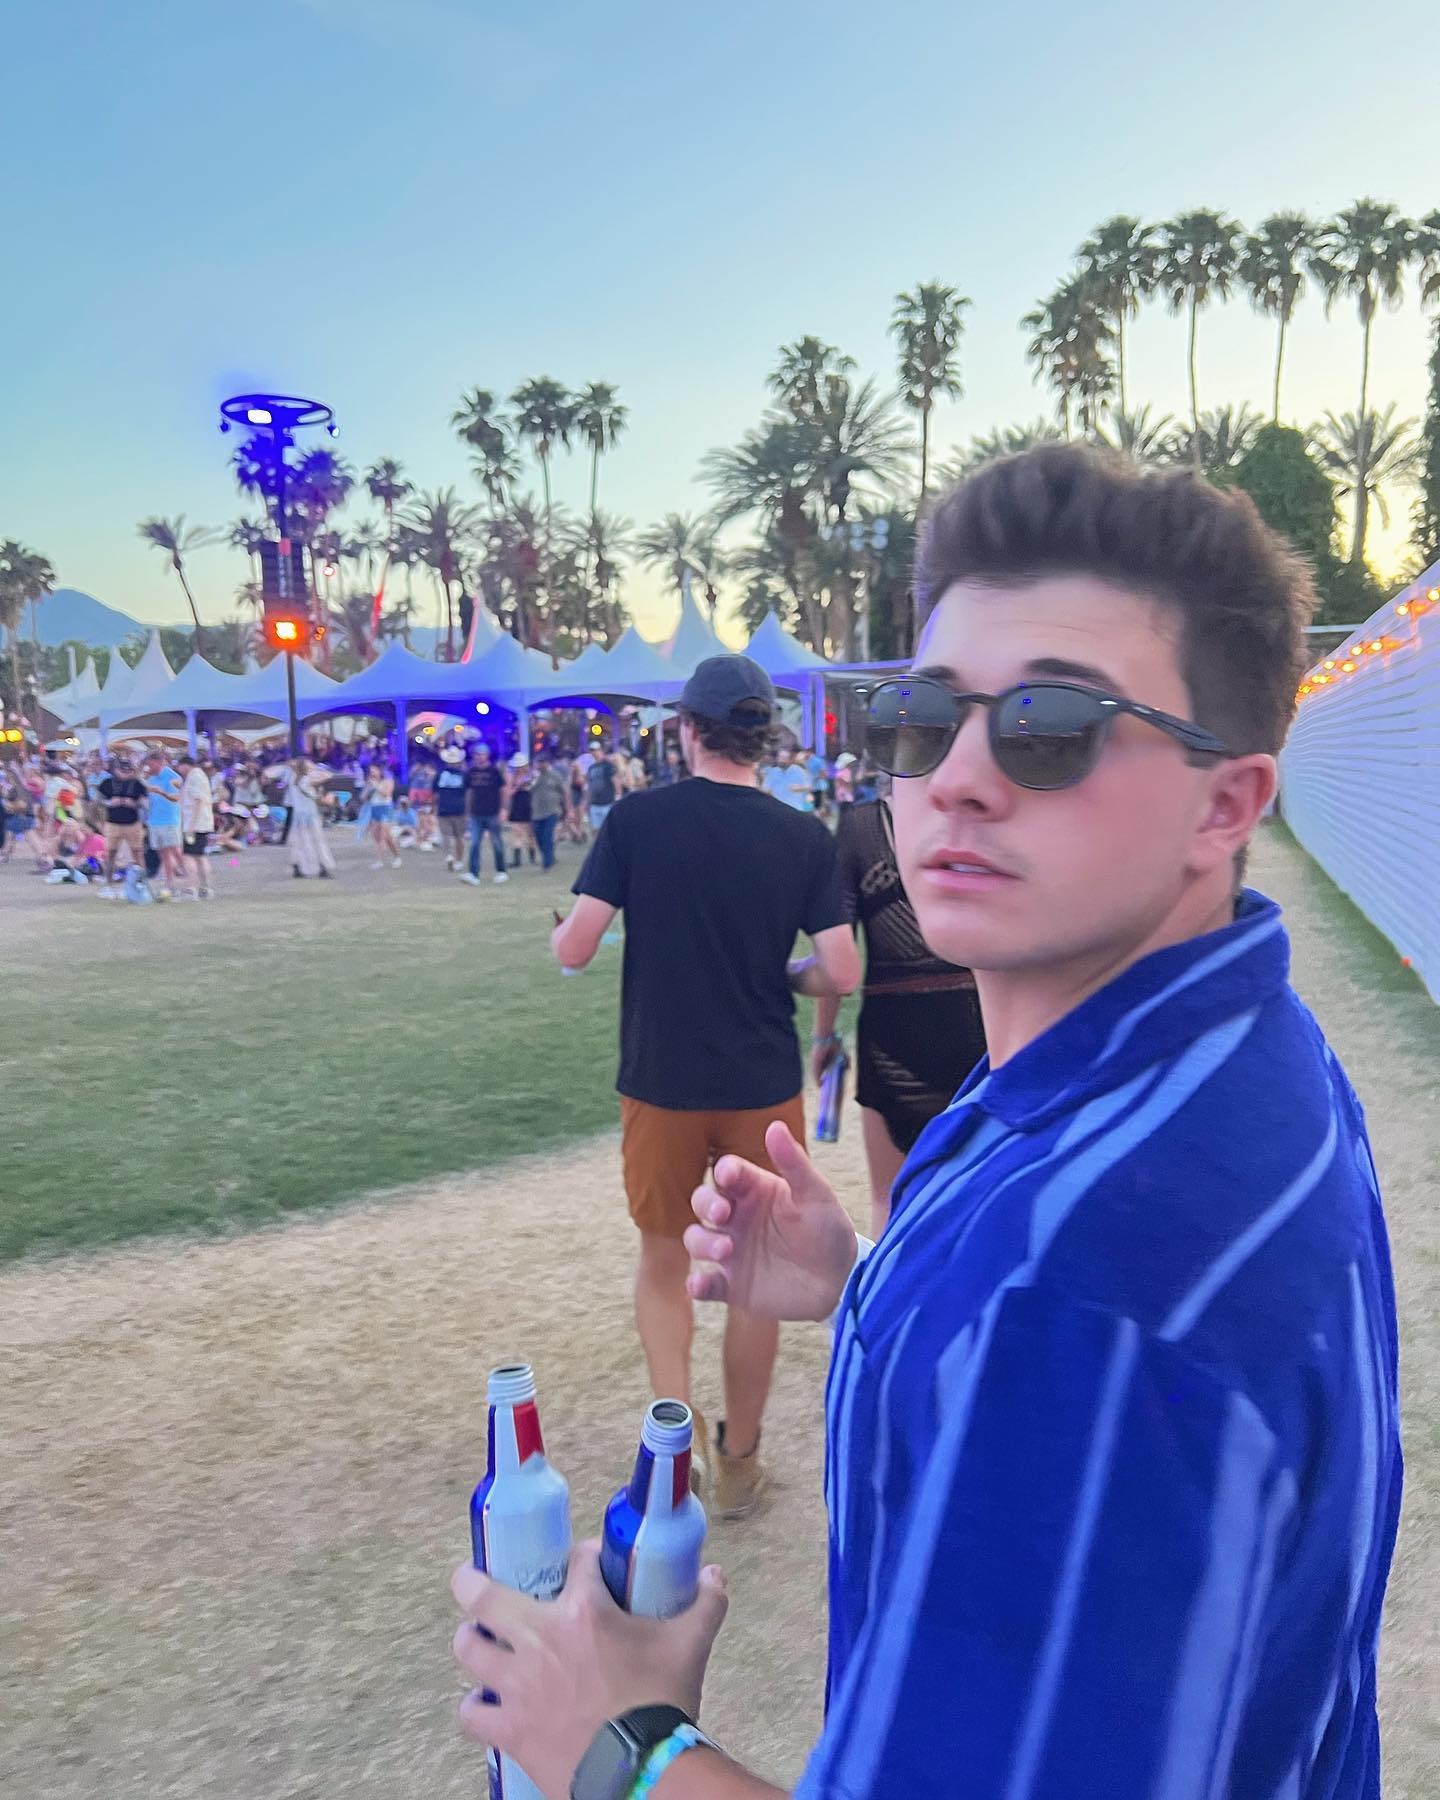 Picture of Bradley Steven Perry in General Pictures - bradley-steven ...